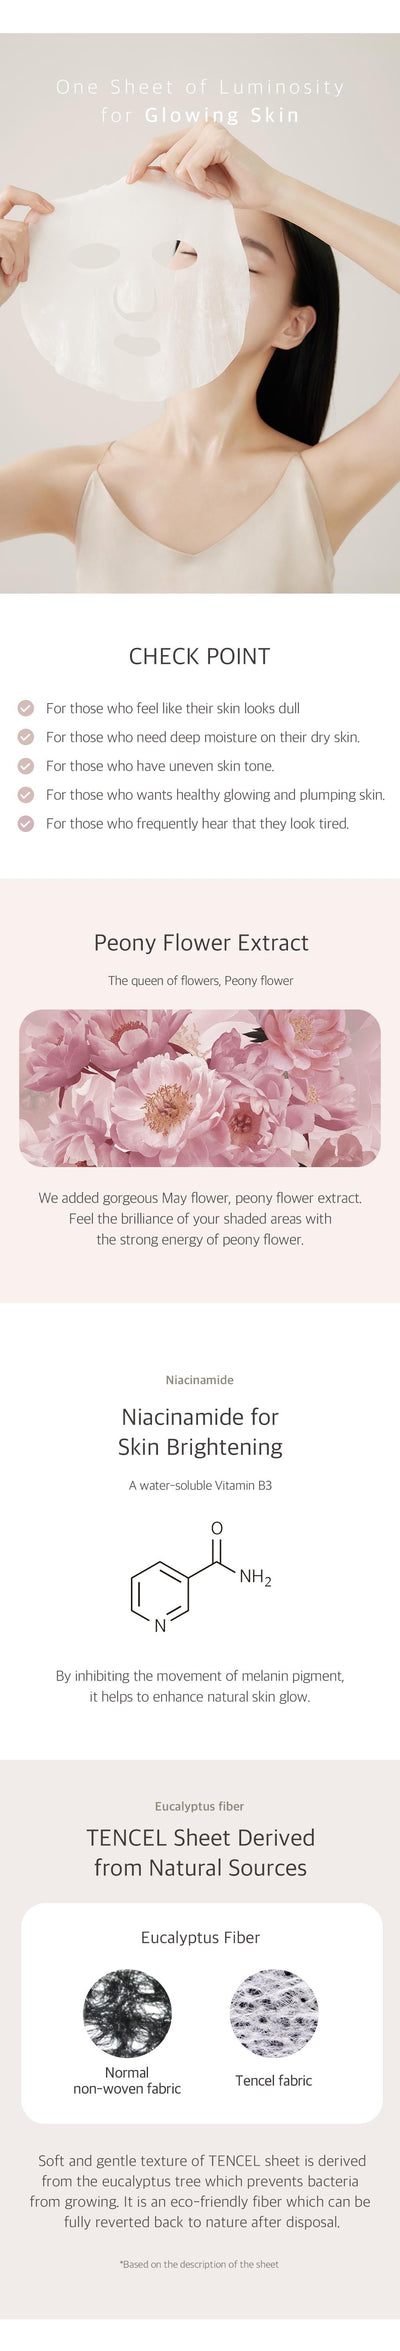 [Needly] Peony Jelly Mask 10 sheets-Luxiface.com